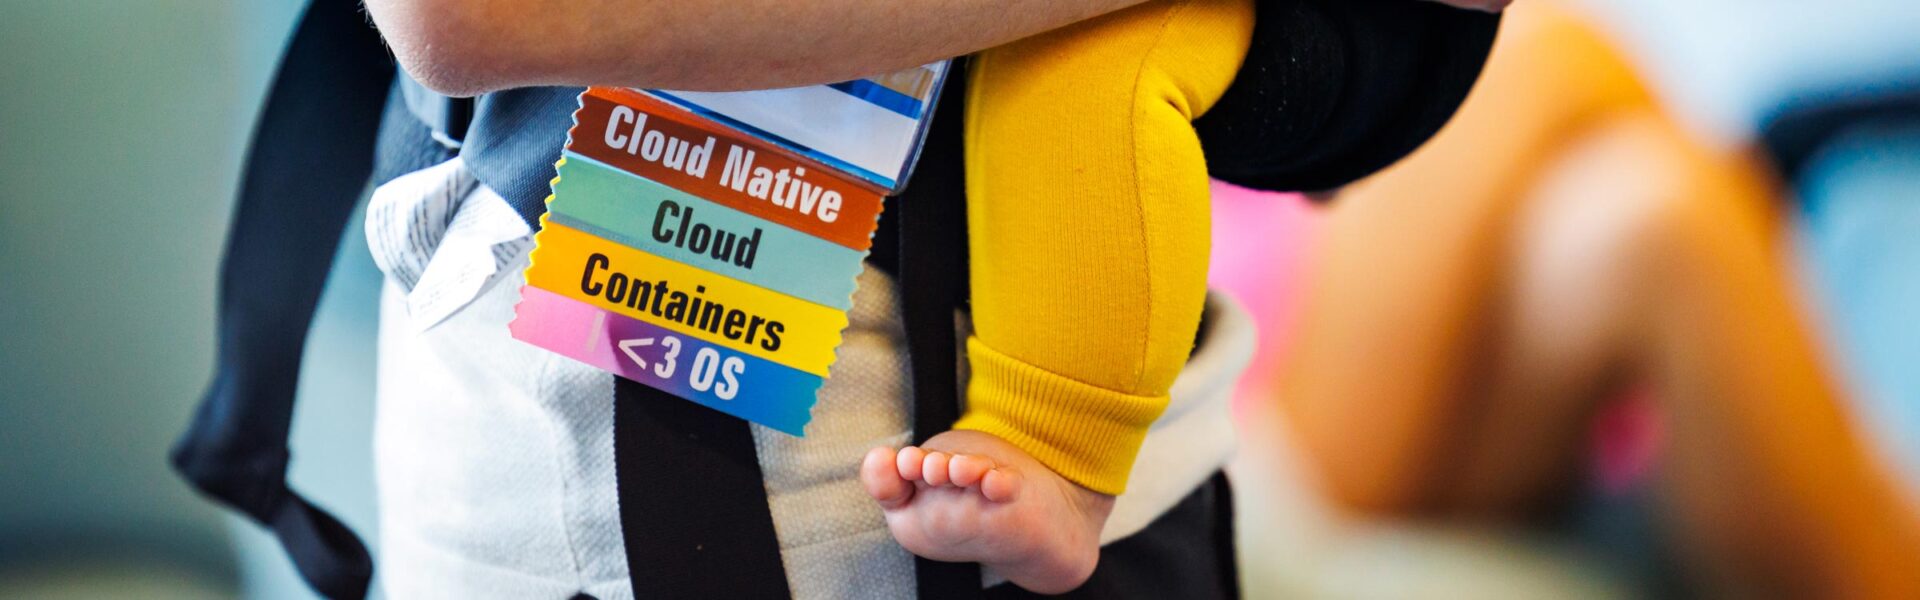 A parent holding a baby in a carrier. The adult has an event badge on with ribbons saying, "Cloud Native, Cloud, Containers, and I heart OS."